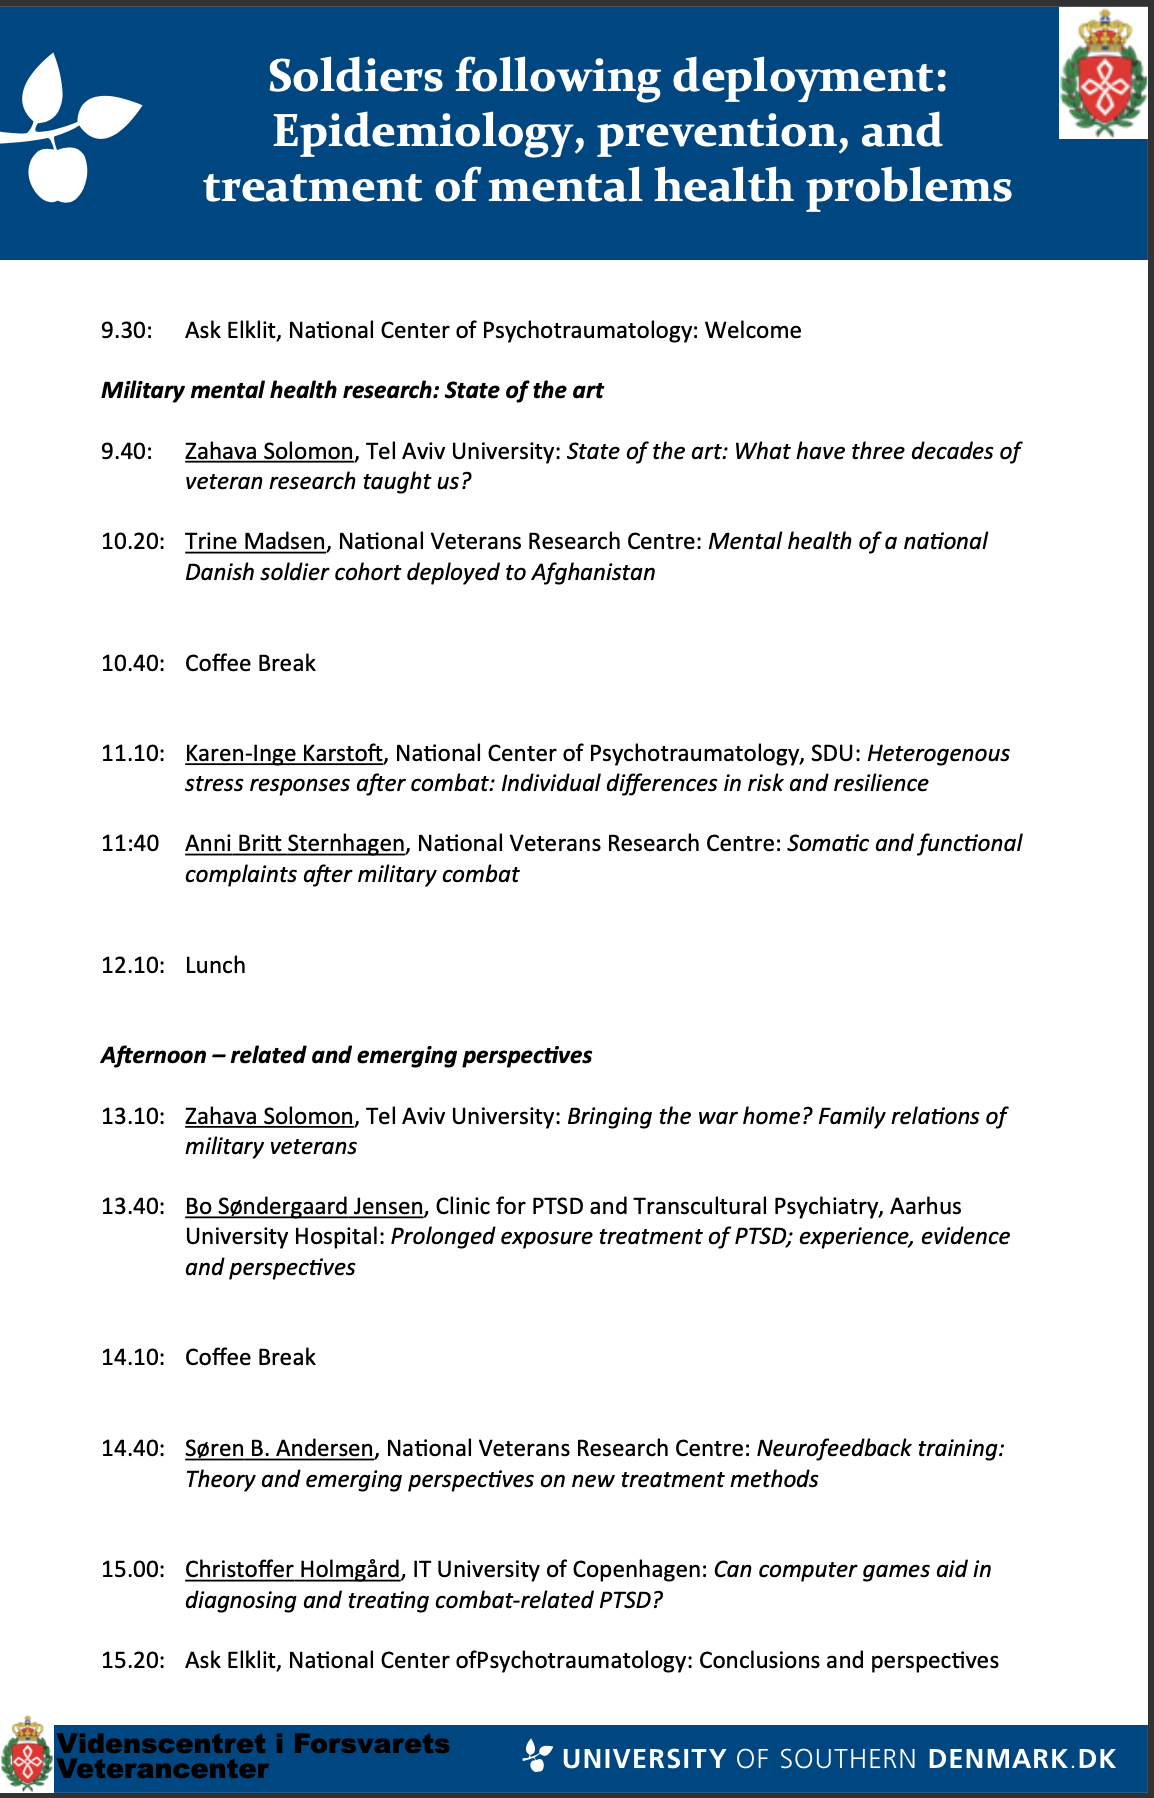 Overview of programme